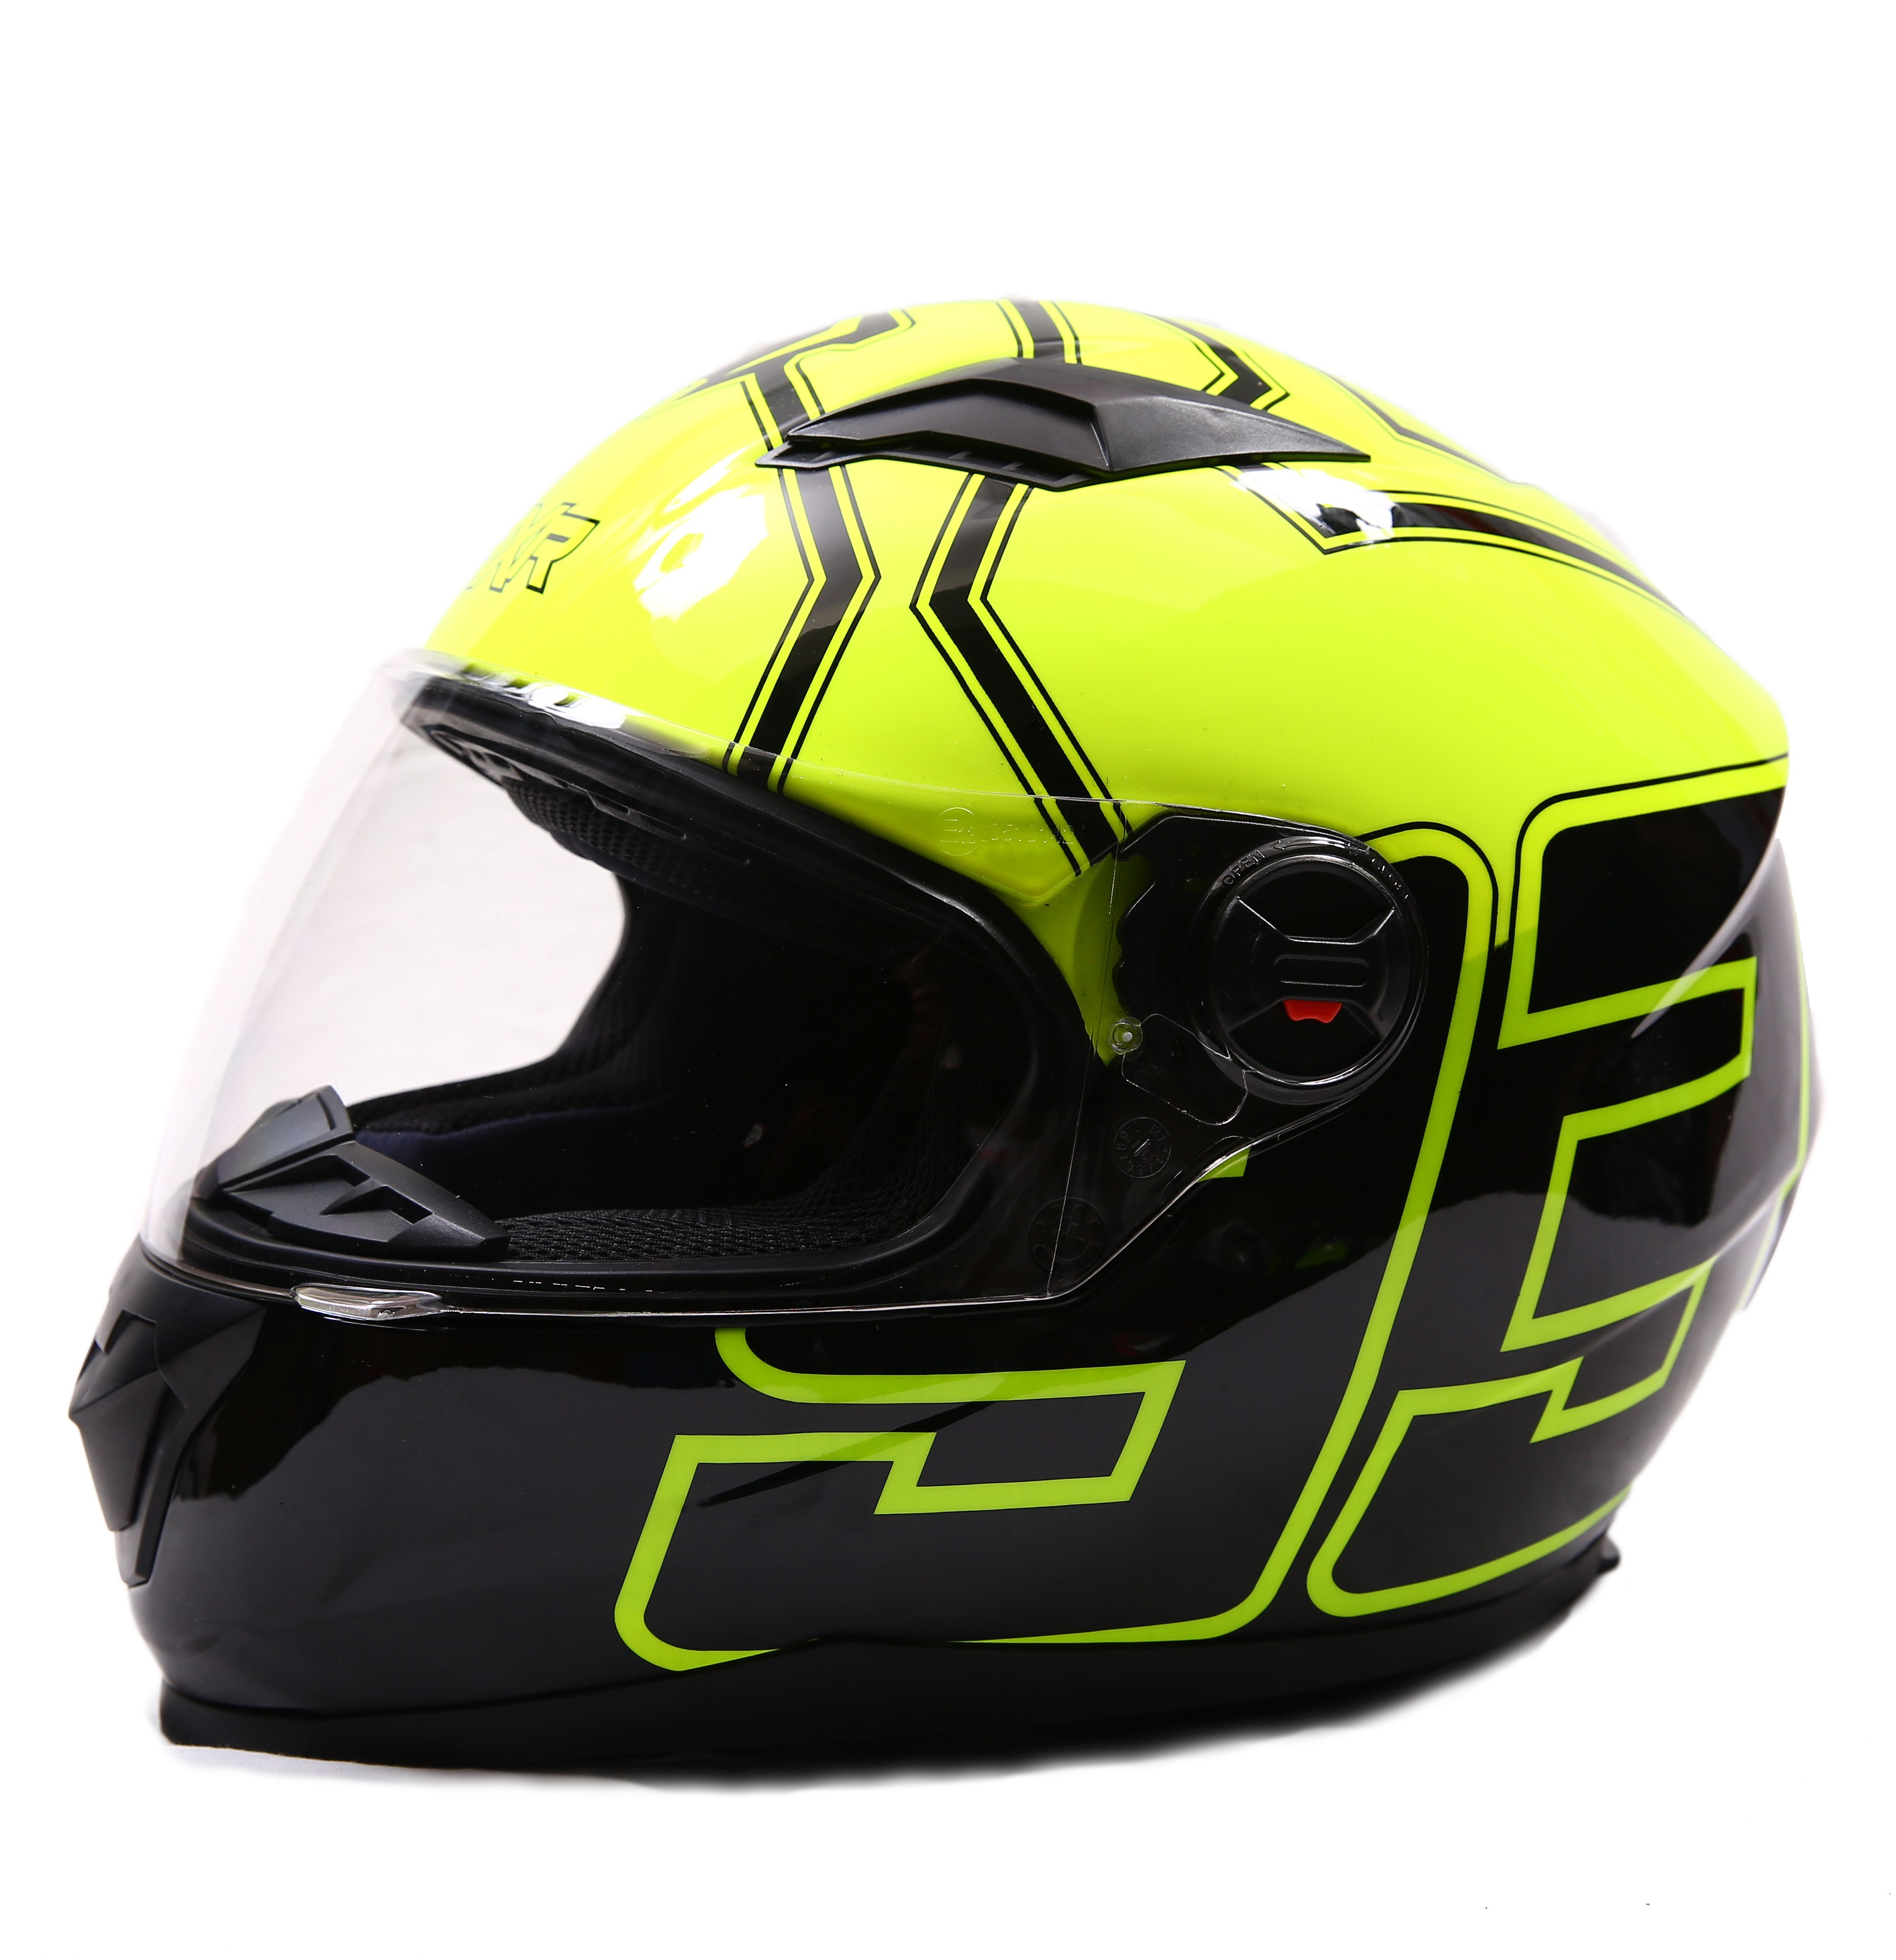 AGV Compact Course Helmet - Yellow/Black | Free Next Day 